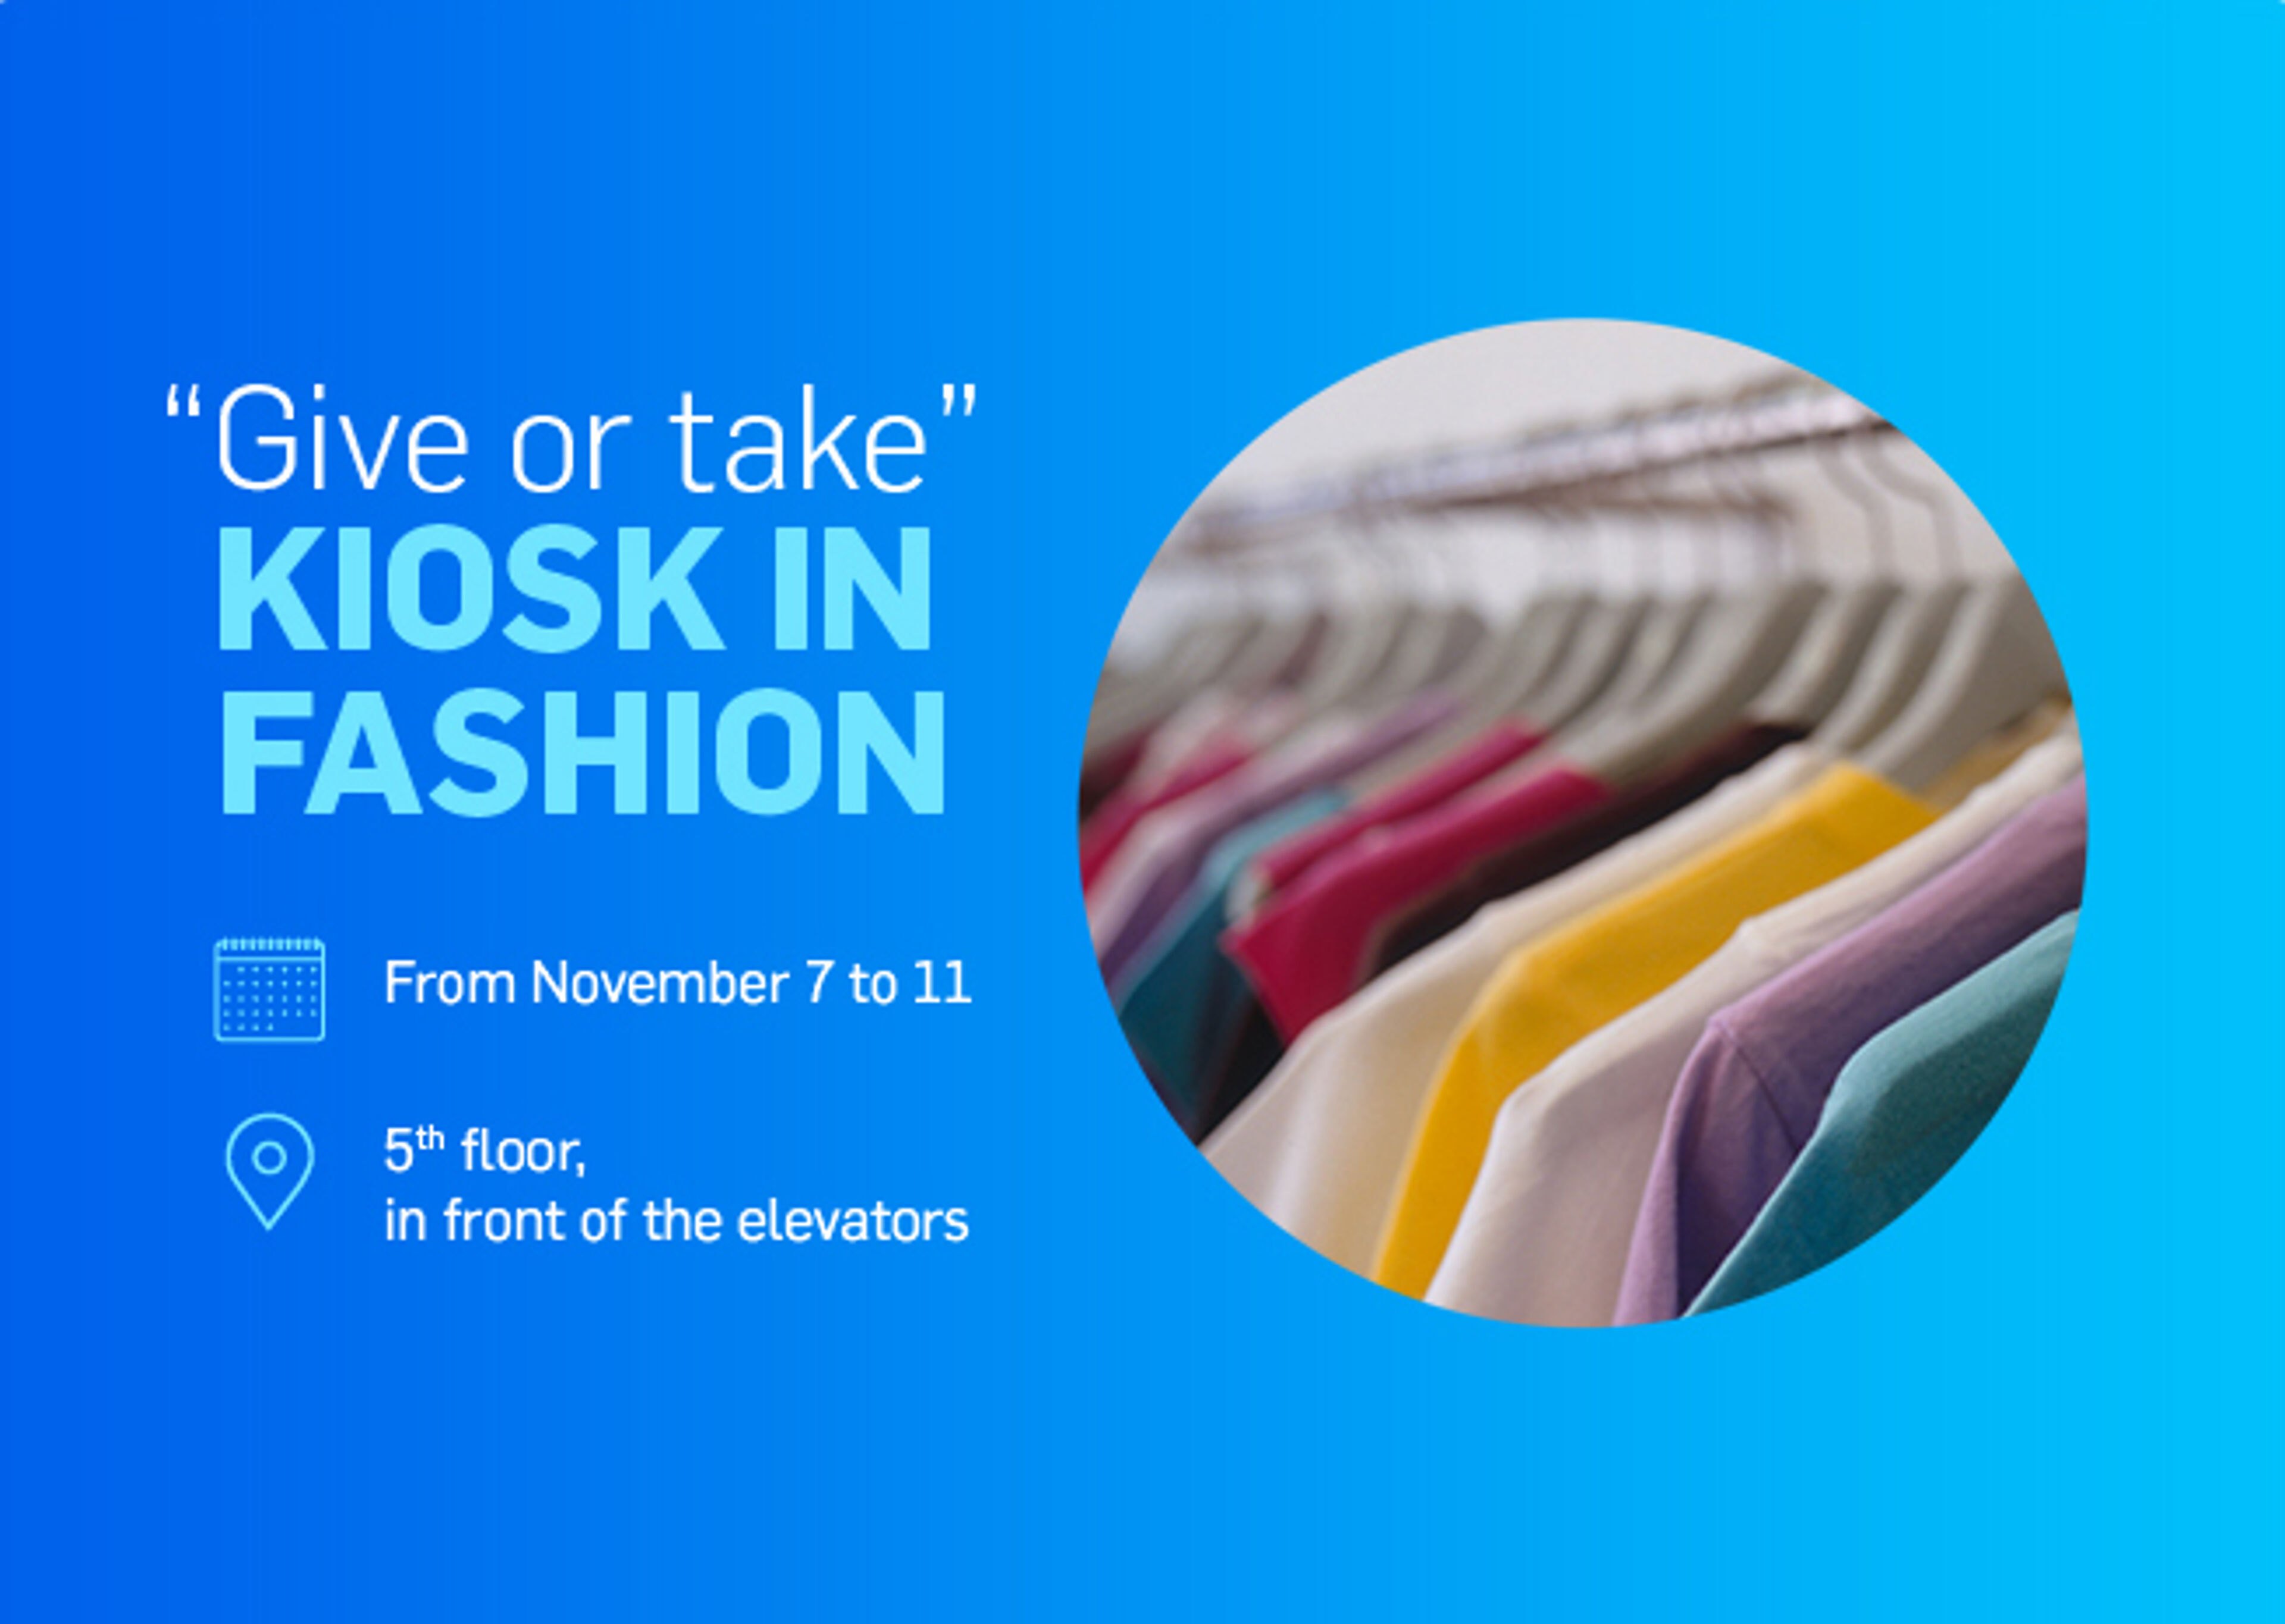 Announcement for a "Give or Take" fashion exchange kiosk, available from November 7 to 11, on the 5th floor in front of the elevators.